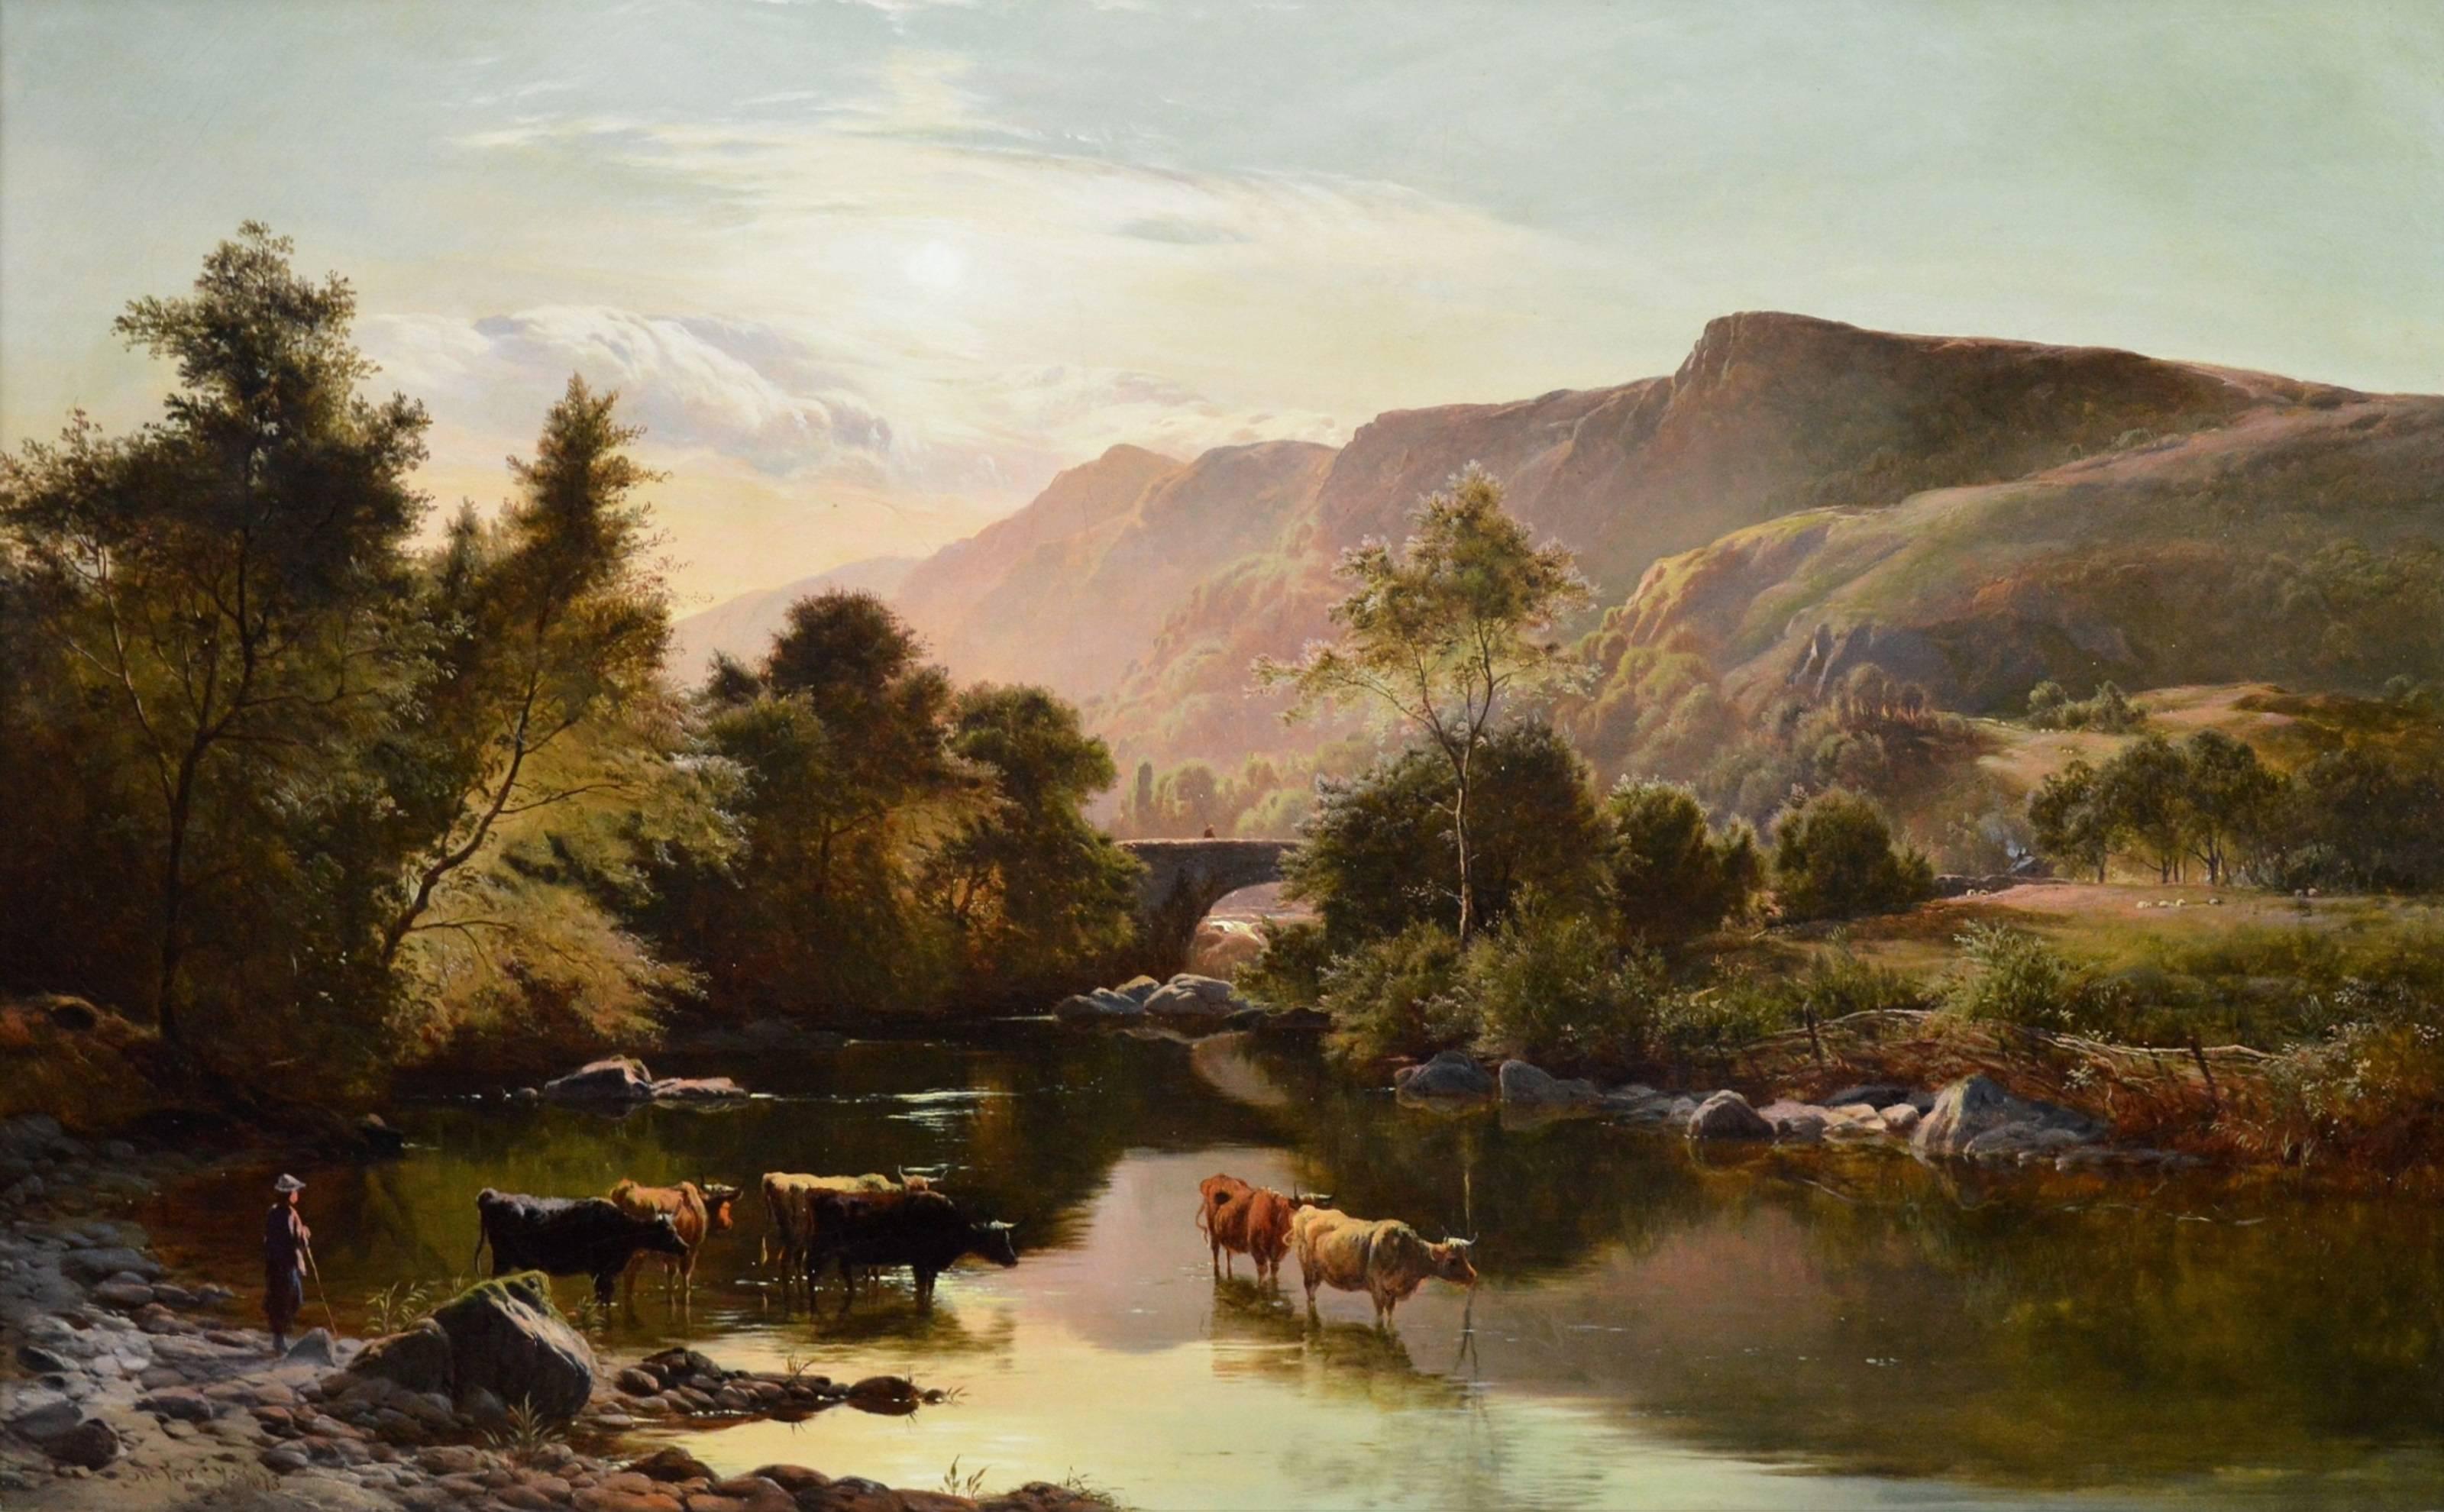 Betws-y-Coed, North Wales - Large 19th Century Oil Painting Sidney Richard Percy 2